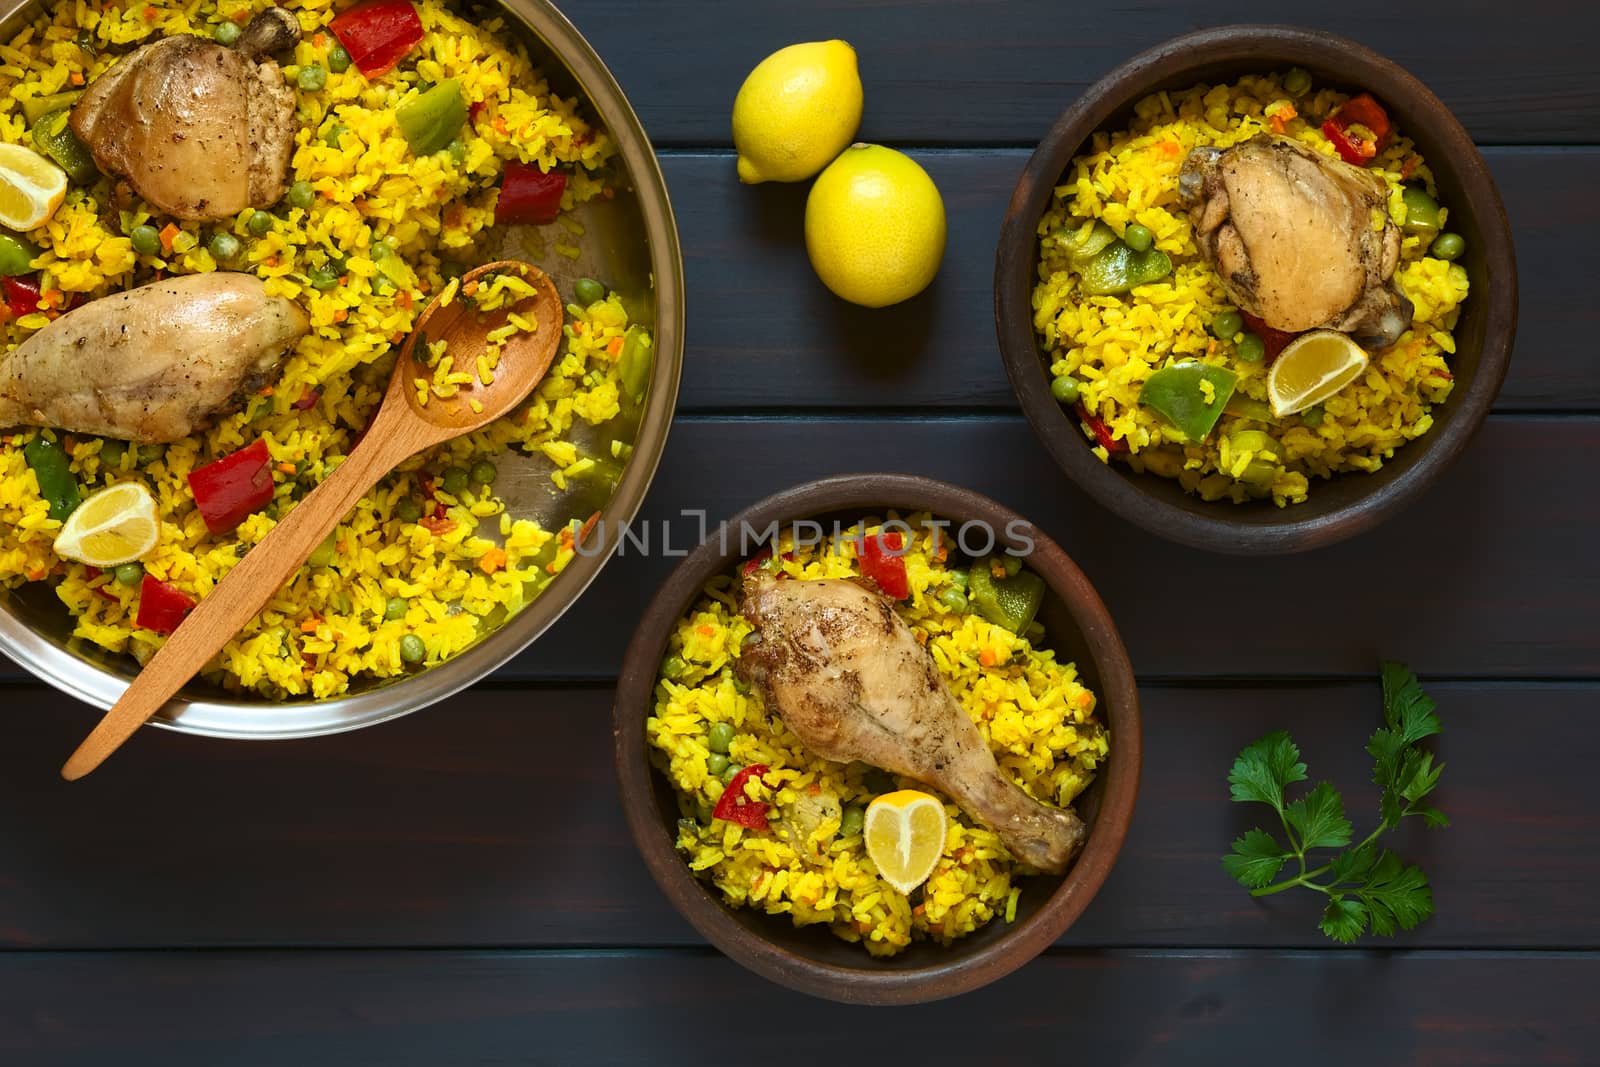 Overhead shot of two rustic bowls and a pot of chicken paella, a traditional Valencian (Spanish) rice dish made of rice, chicken, peas and capsicum and served with lemon, photographed on dark wood with natural light